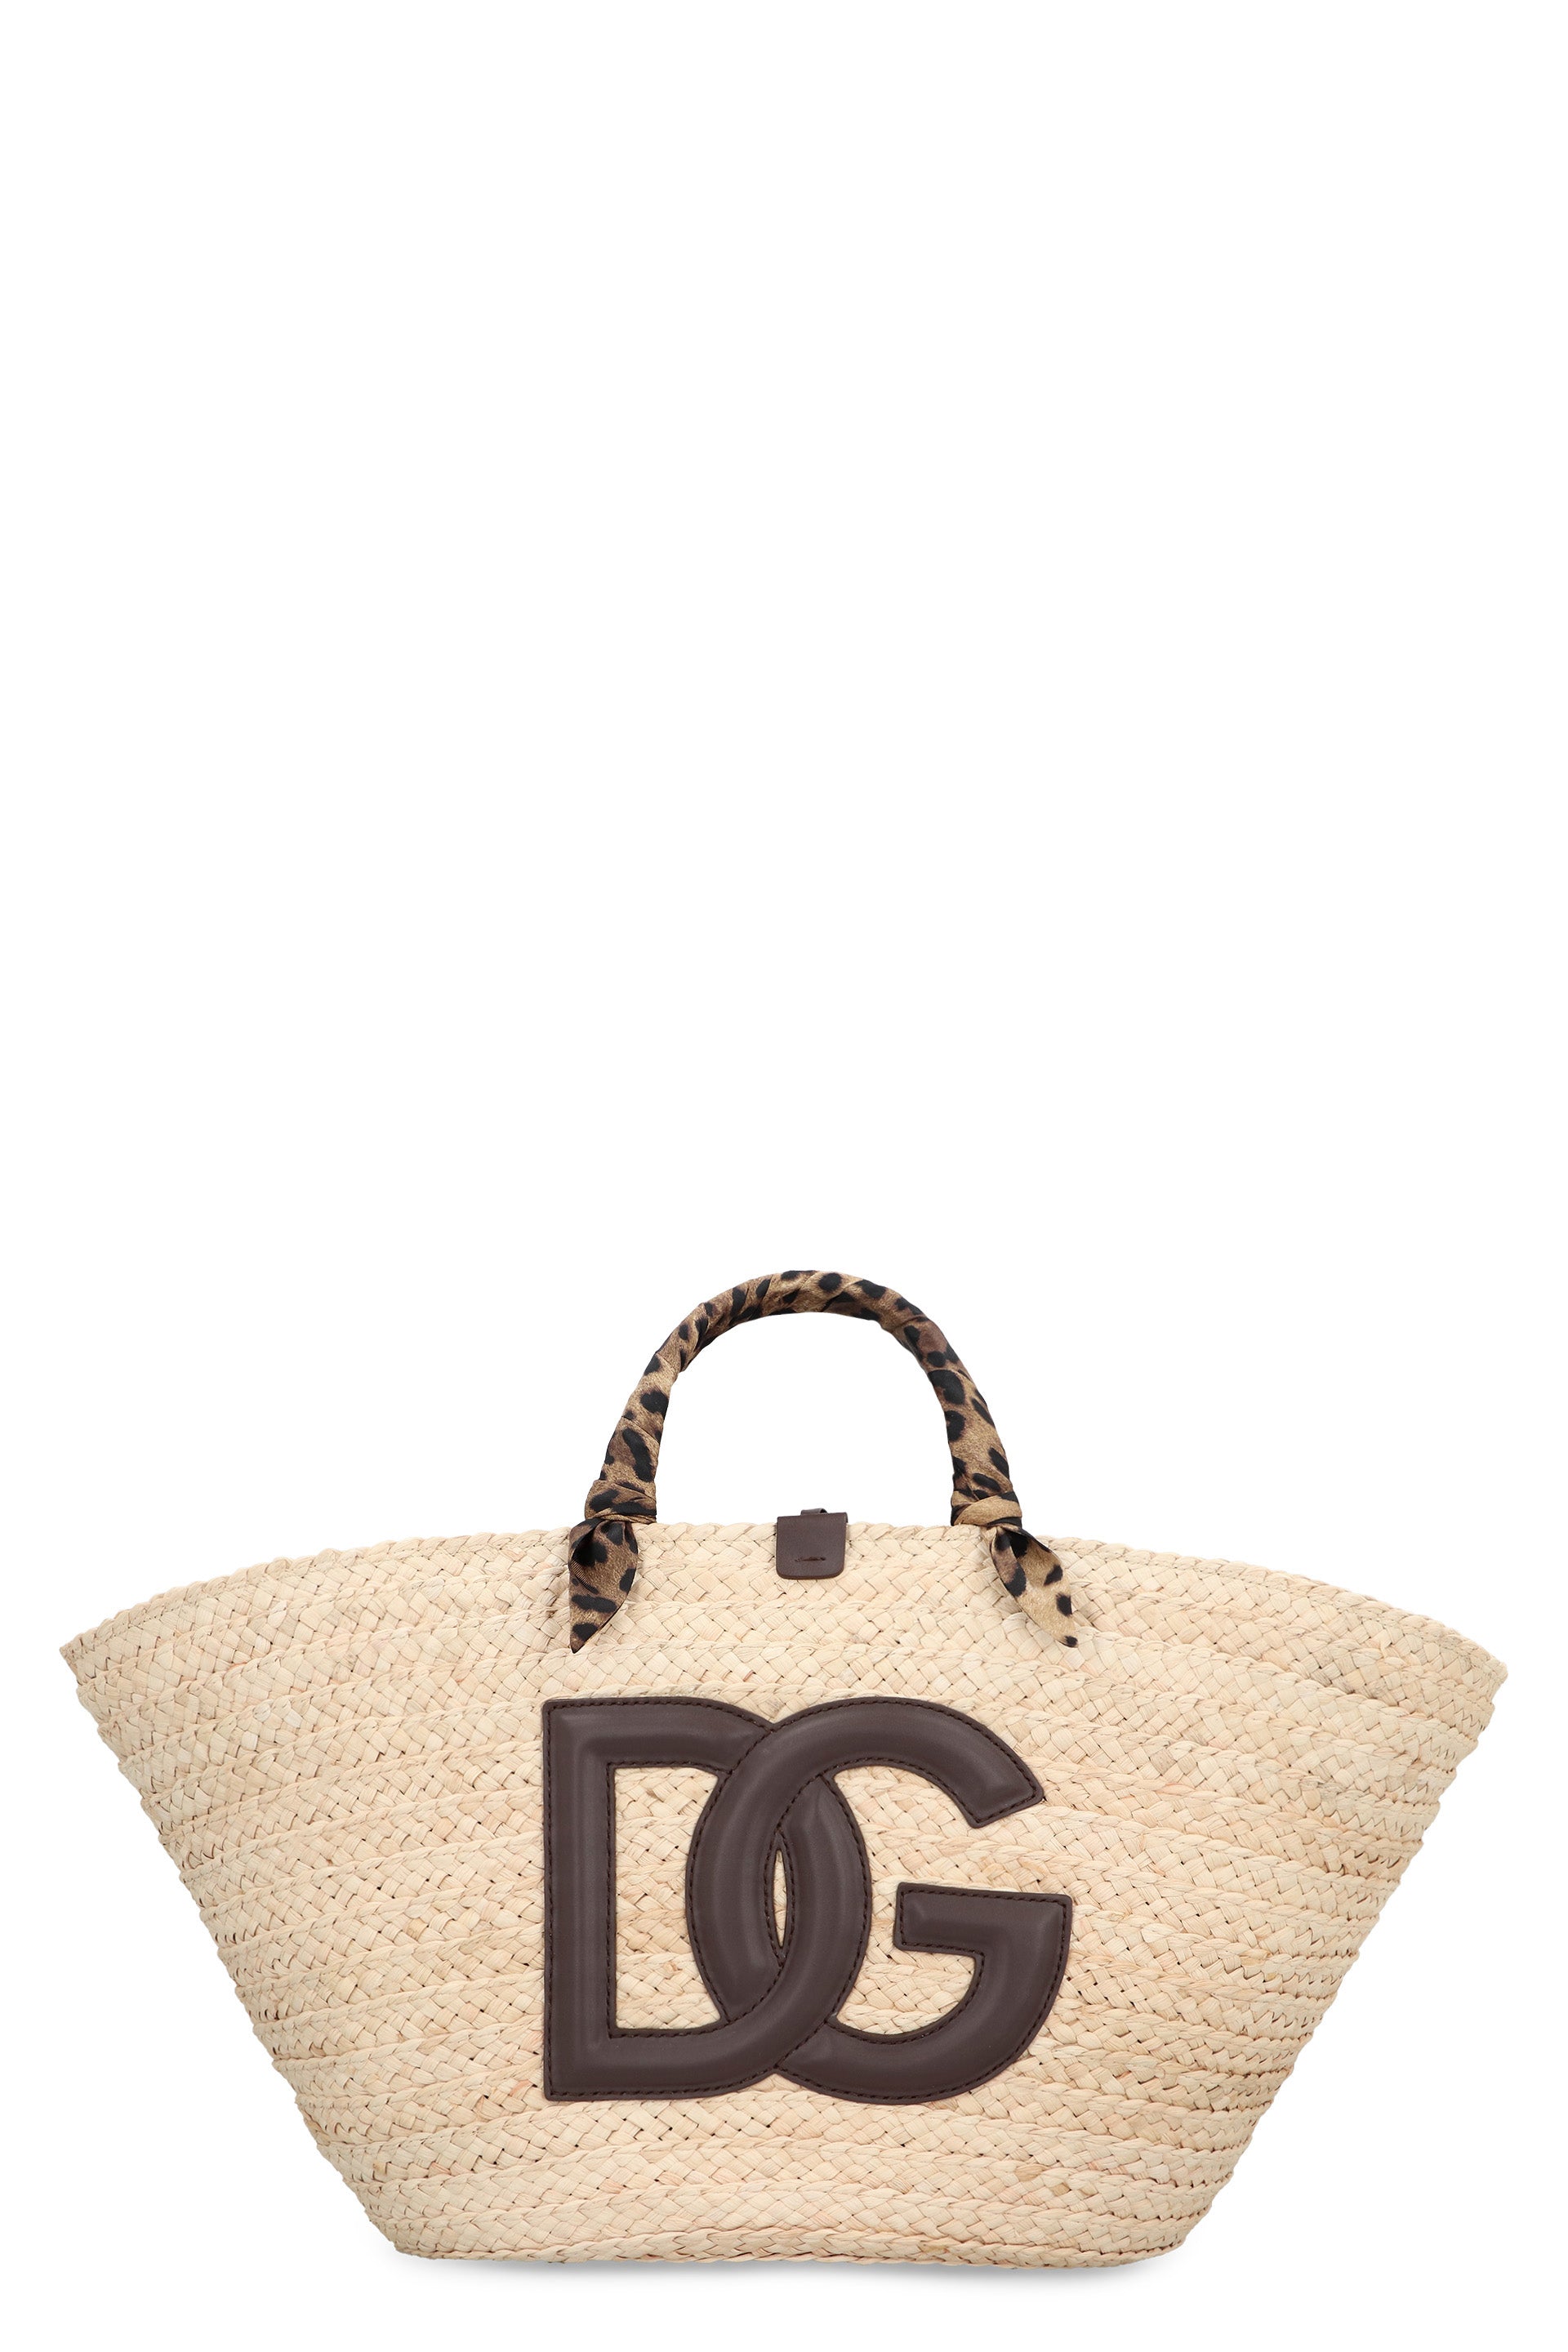 Shop Dolce & Gabbana Stunning Beige Woven Tote Bag For Fashionable Women In Multicolor